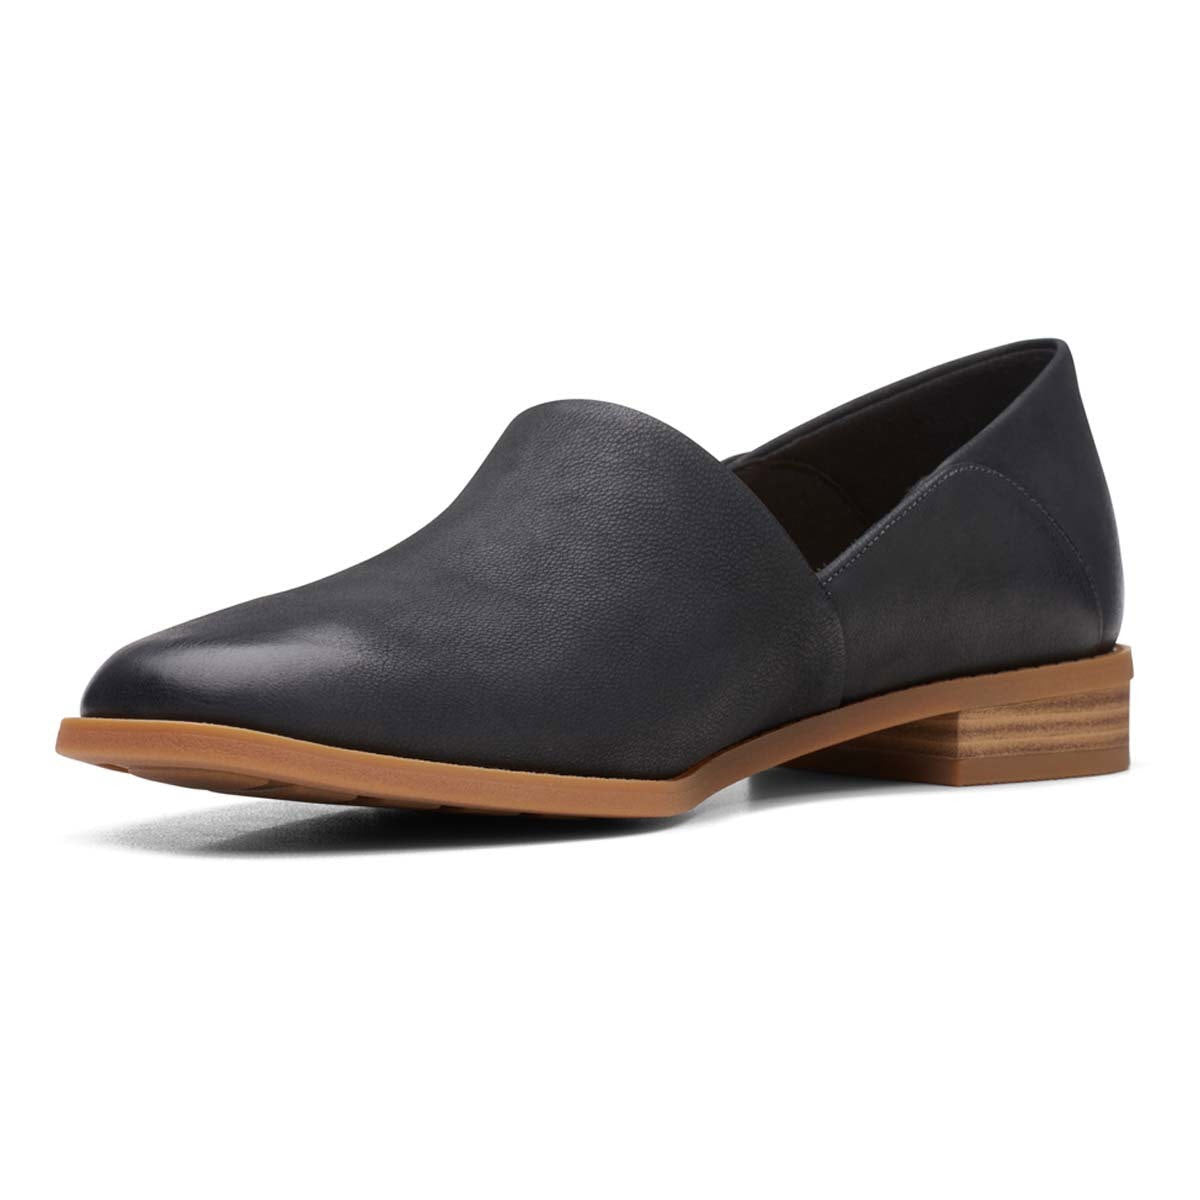 A single Clarks Pure Belle Black loafer with a low wood-effect heel and tan sole, featuring a Contour Cushion footbed, shown against a white background.